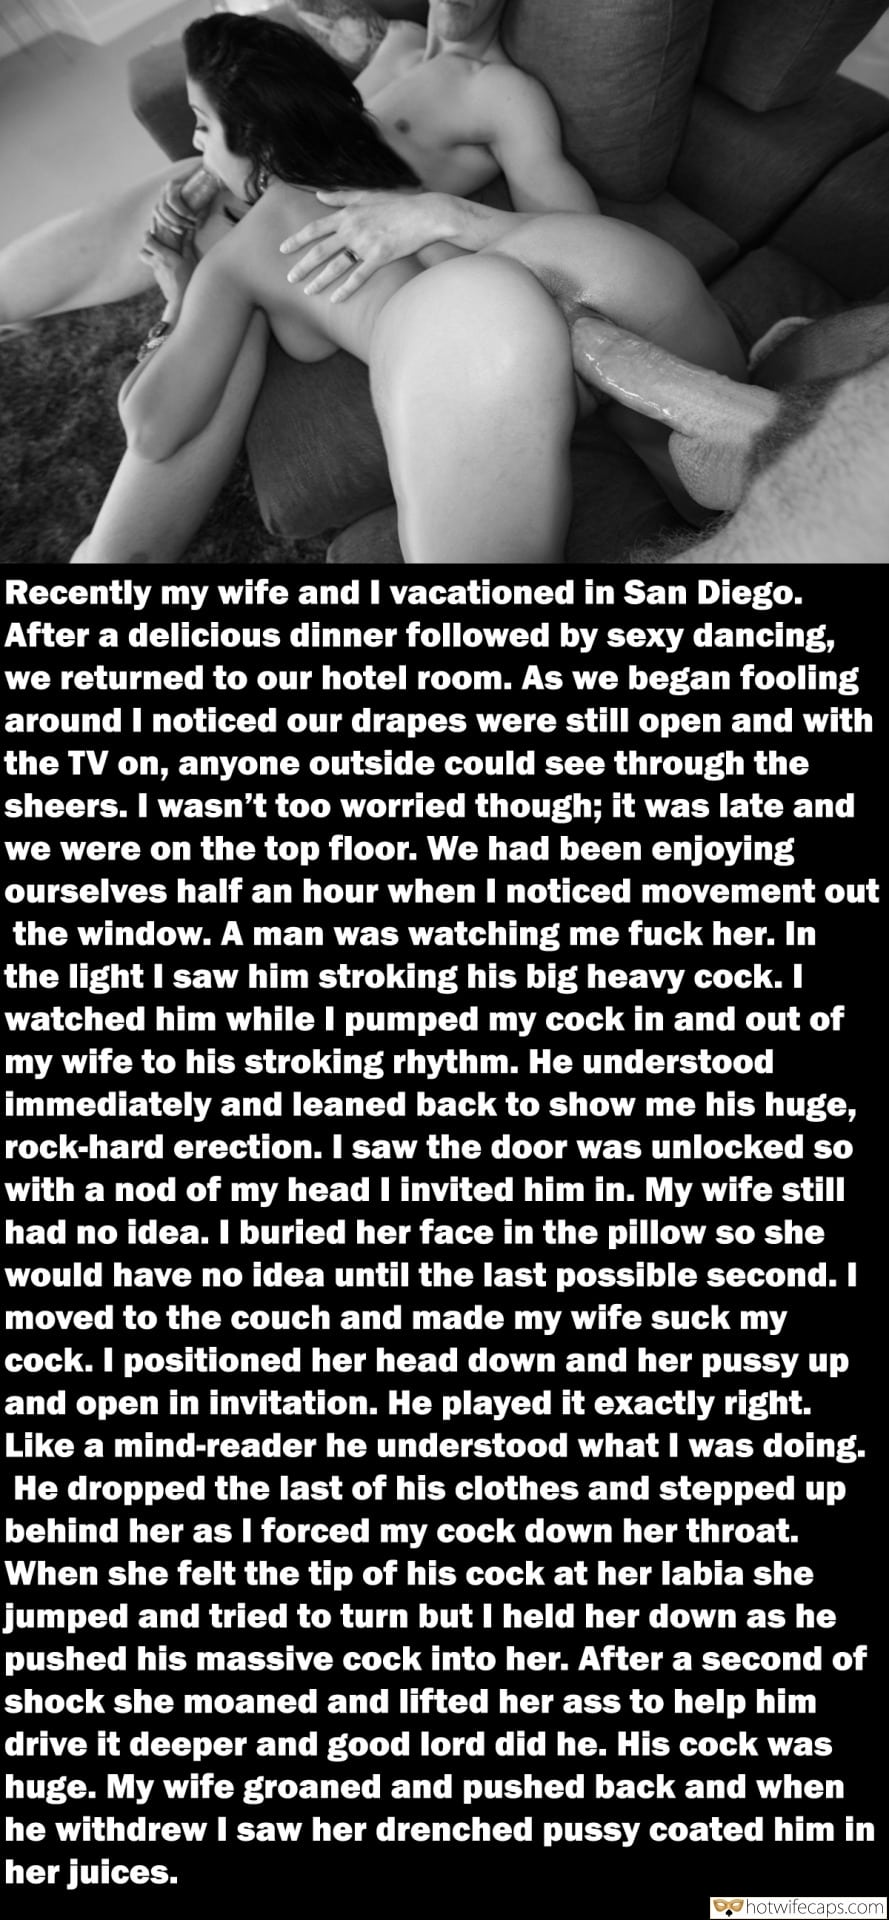 Story of cheating on bf with huge dick tumblr